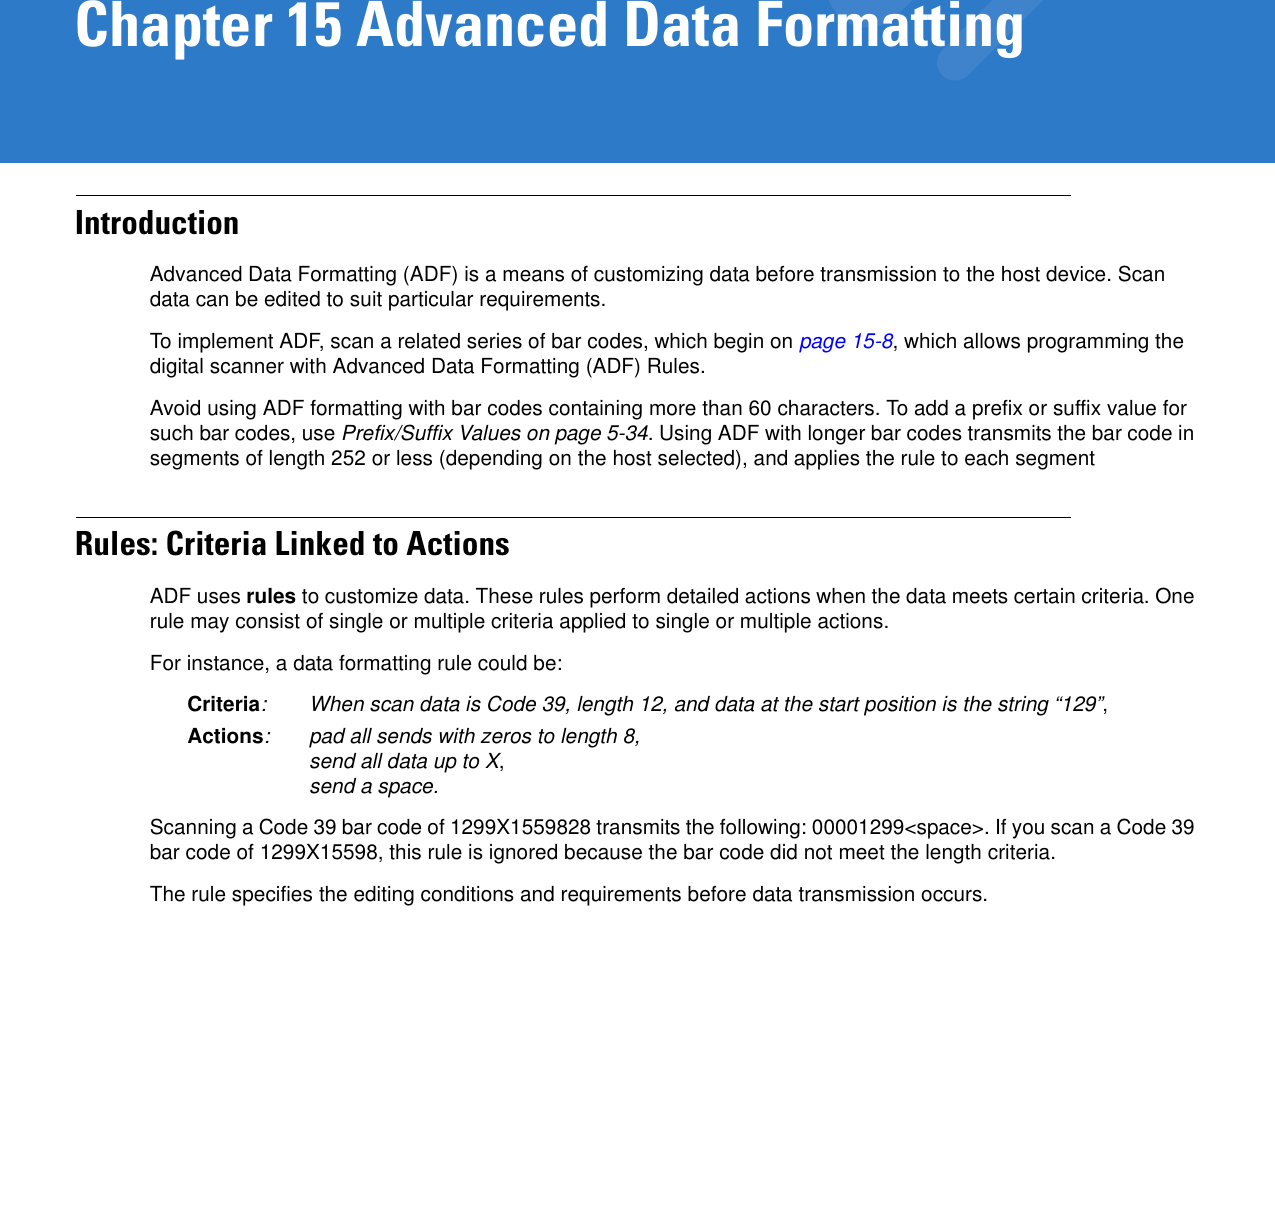 Chapter 15 Advanced Data FormattingIntroductionAdvanced Data Formatting (ADF) is a means of customizing data before transmission to the host device. Scan data can be edited to suit particular requirements. To implement ADF, scan a related series of bar codes, which begin on page 15-8, which allows programming the digital scanner with Advanced Data Formatting (ADF) Rules.Avoid using ADF formatting with bar codes containing more than 60 characters. To add a prefix or suffix value for such bar codes, use Prefix/Suffix Values on page 5-34. Using ADF with longer bar codes transmits the bar code in segments of length 252 or less (depending on the host selected), and applies the rule to each segmentRules: Criteria Linked to ActionsADF uses rules to customize data. These rules perform detailed actions when the data meets certain criteria. One rule may consist of single or multiple criteria applied to single or multiple actions. For instance, a data formatting rule could be:Criteria: When scan data is Code 39, length 12, and data at the start position is the string “129”,Actions: pad all sends with zeros to length 8,send all data up to X,send a space.Scanning a Code 39 bar code of 1299X1559828 transmits the following: 00001299&lt;space&gt;. If you scan a Code 39 bar code of 1299X15598, this rule is ignored because the bar code did not meet the length criteria.The rule specifies the editing conditions and requirements before data transmission occurs.